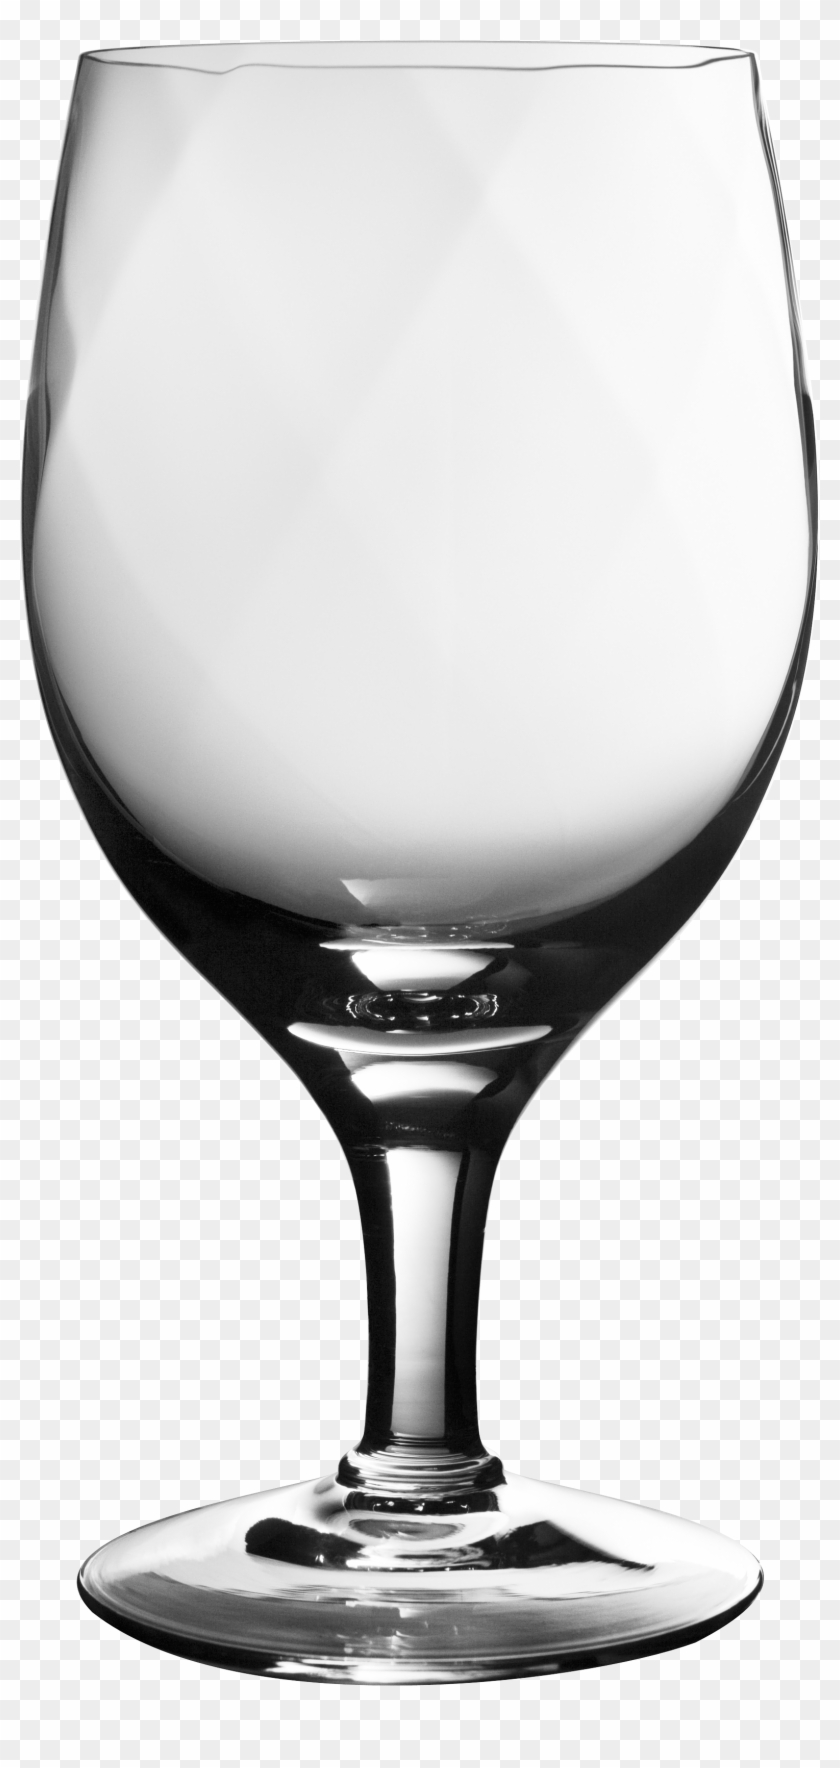 Empty Wine Glass Png Image - Glass Png #532887